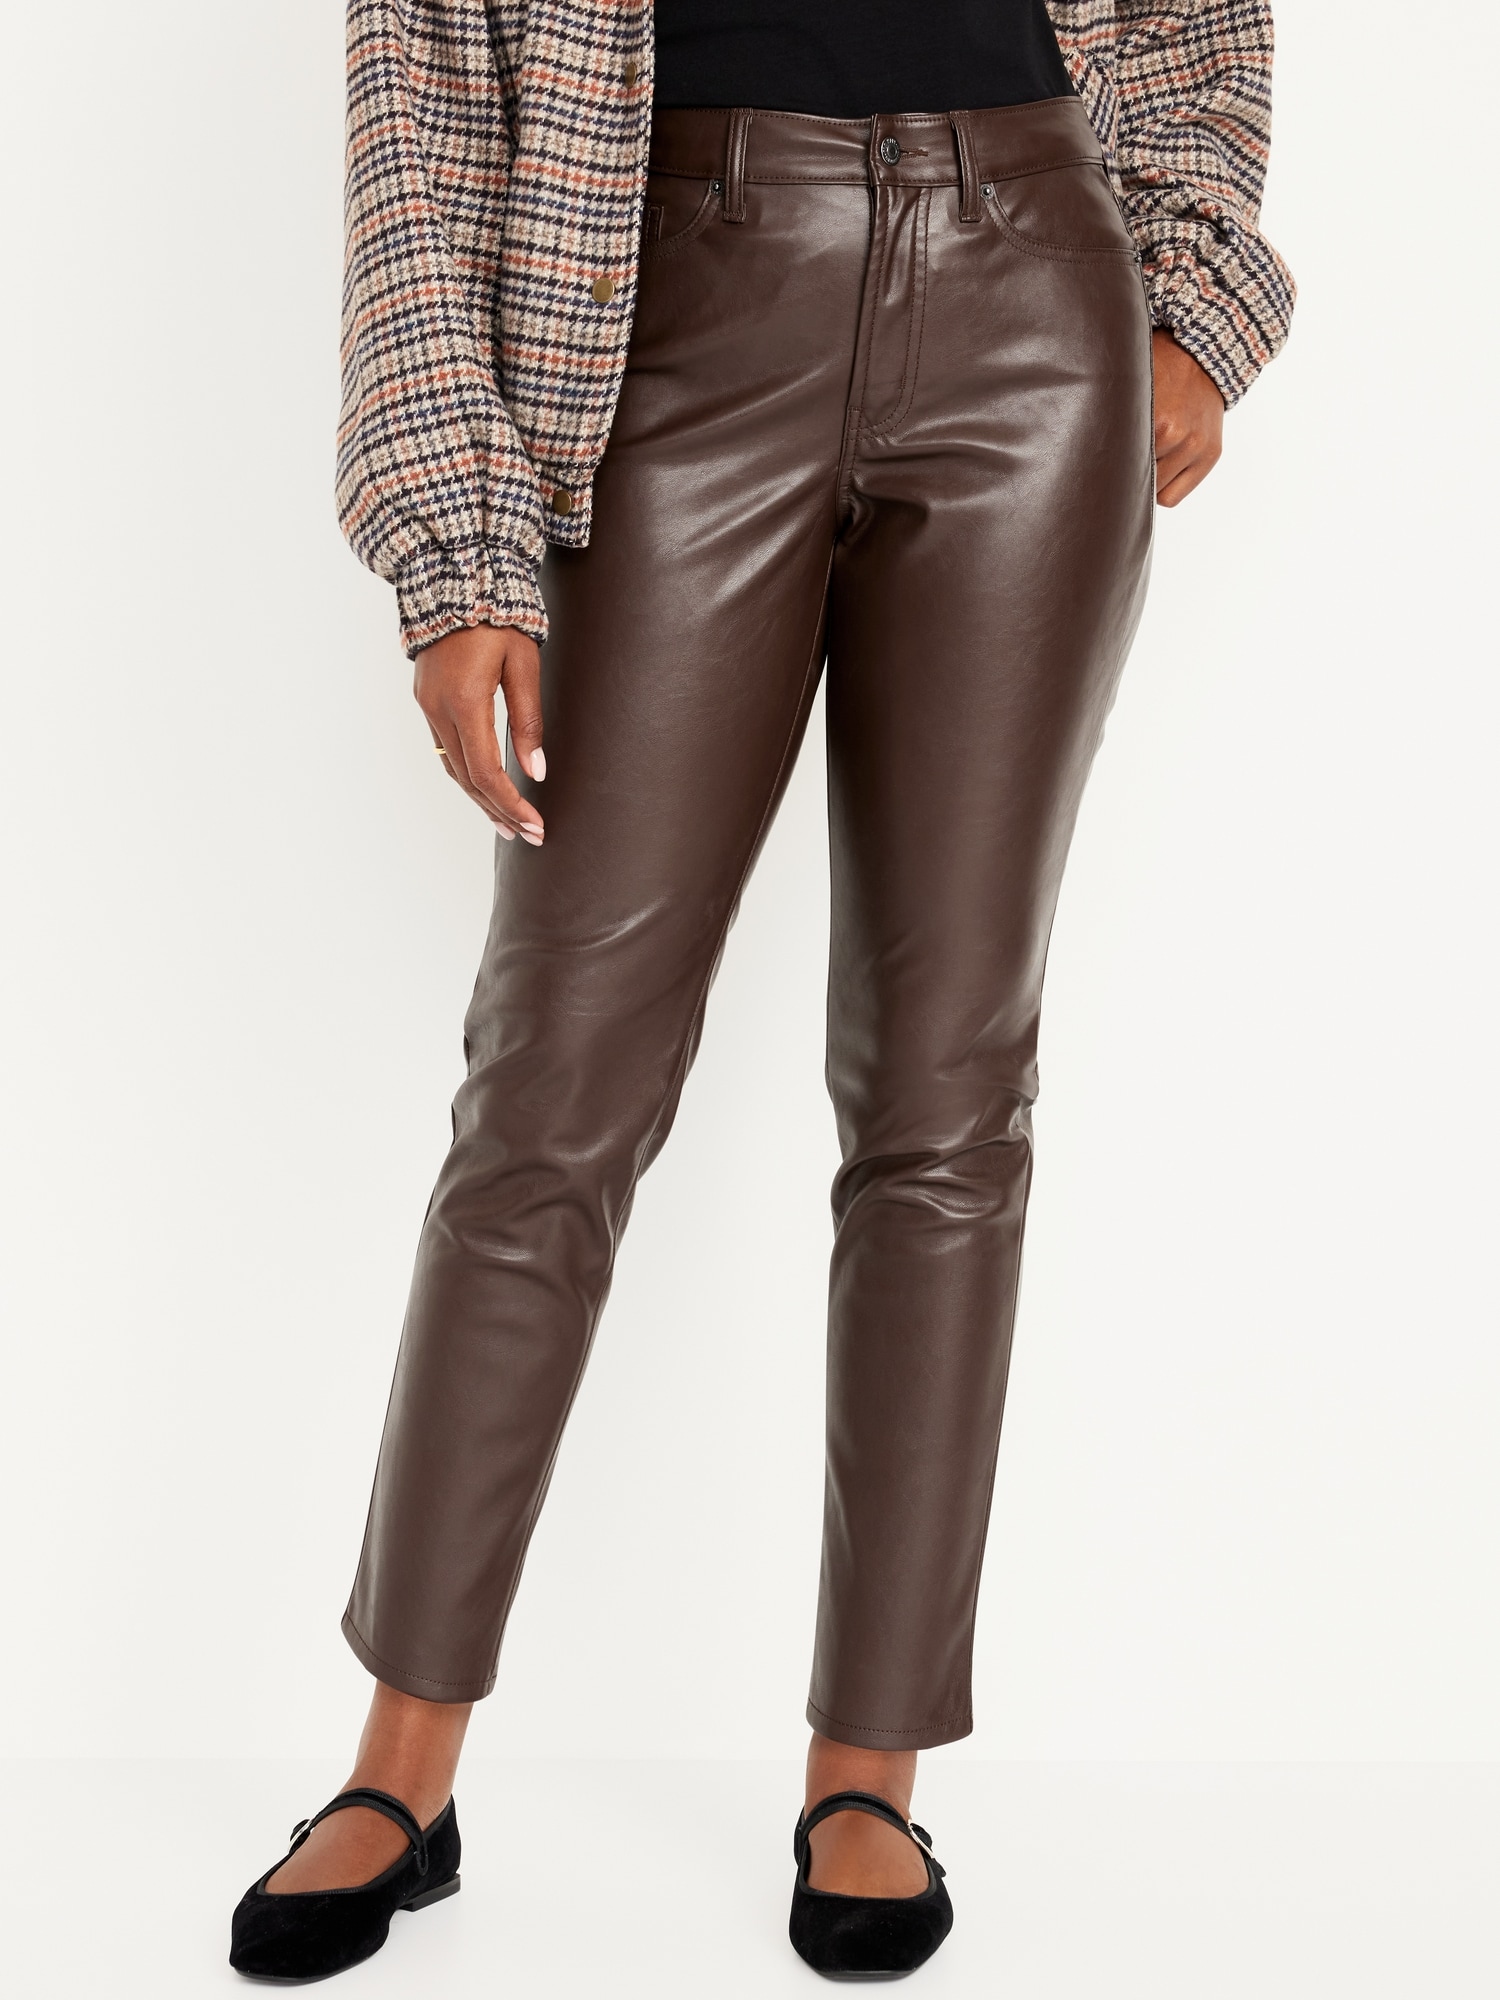 High-Waisted OG Straight Faux-Leather Ankle Pants for Women